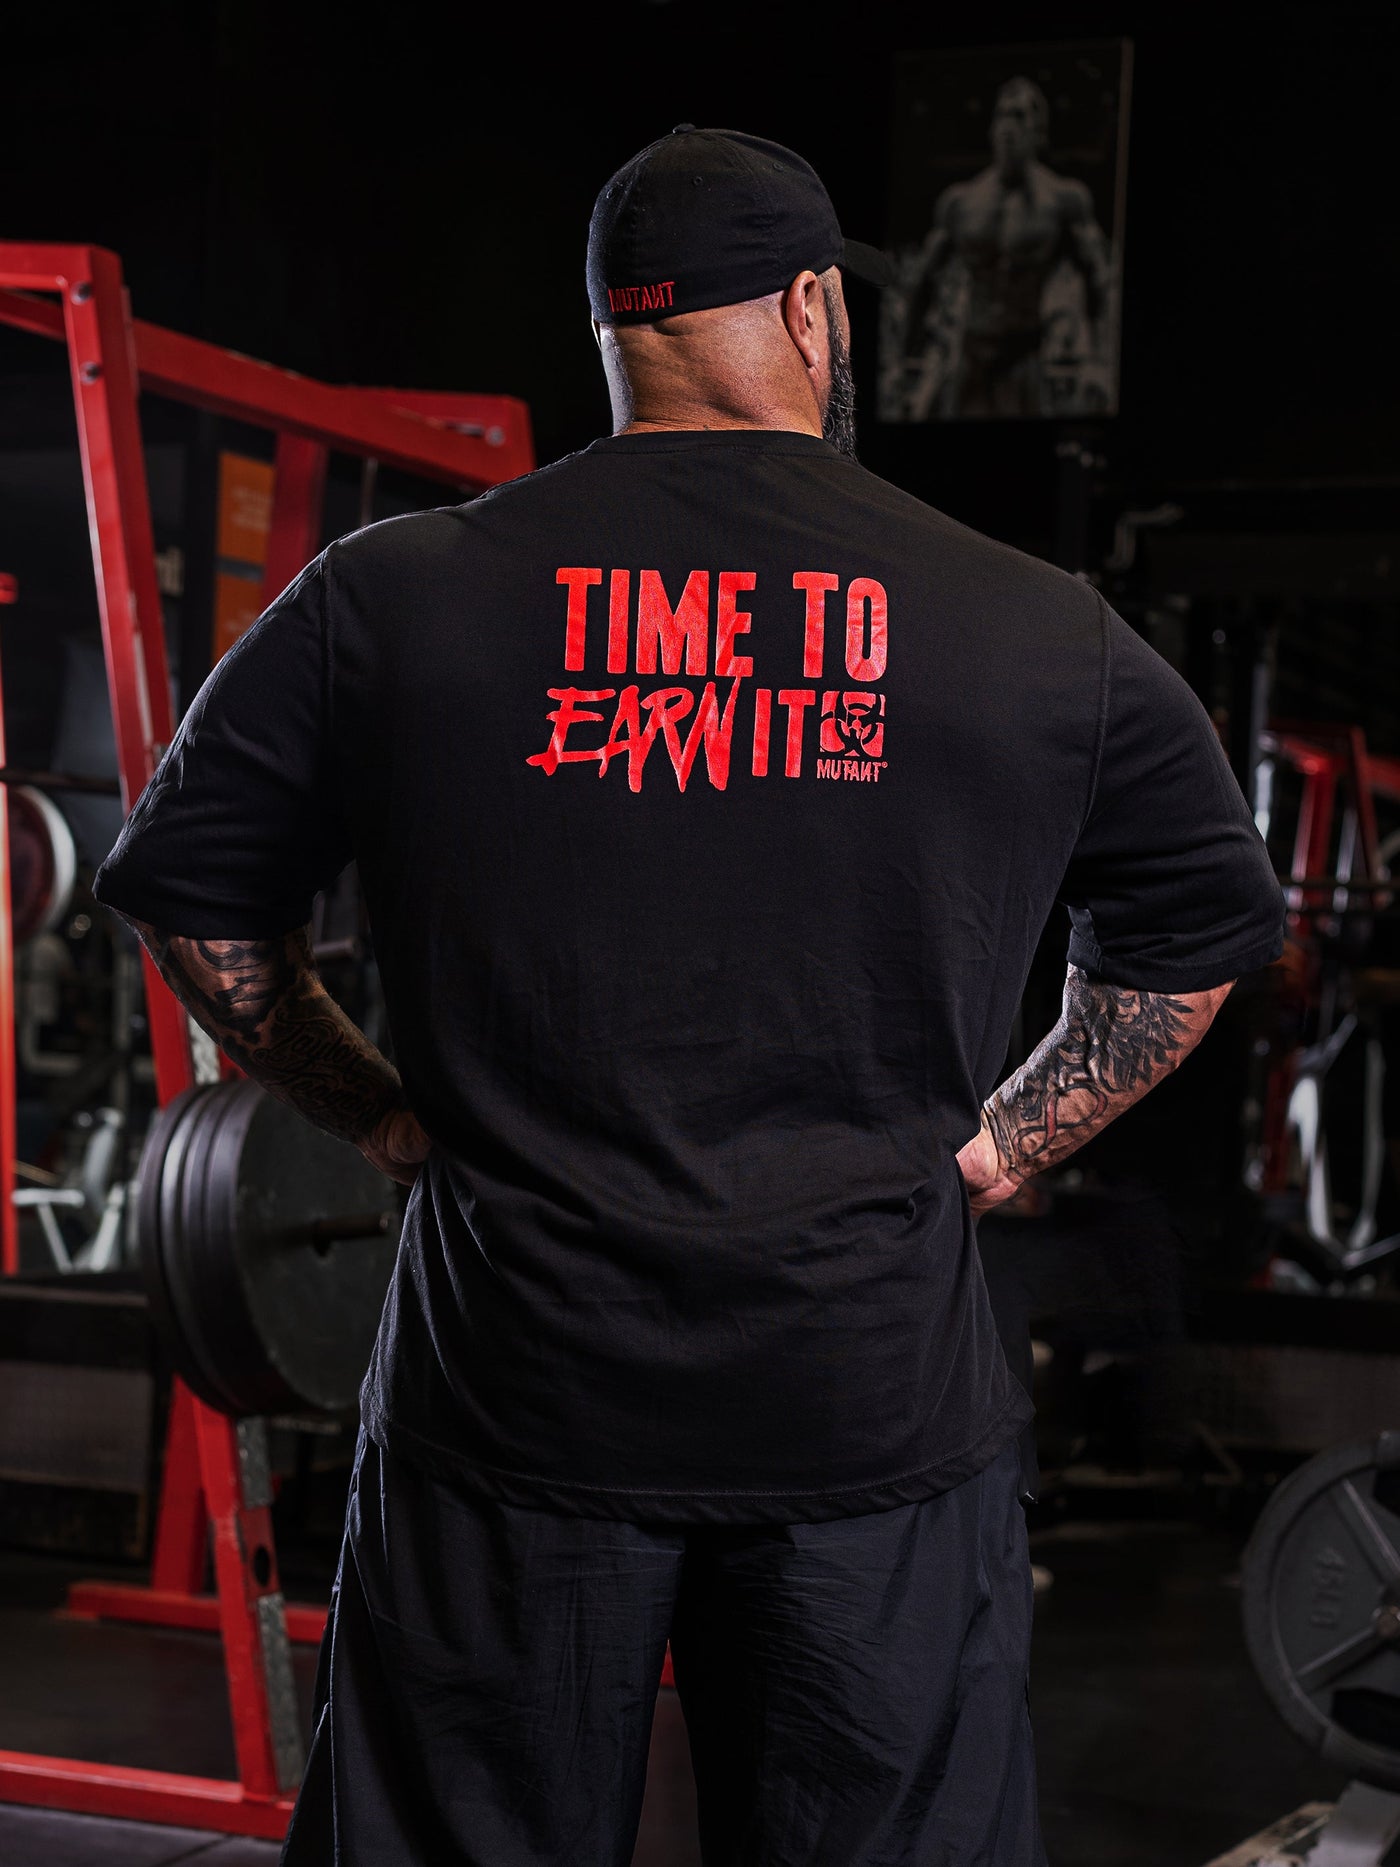  Back view of Dusty Hanshaw, Mutant athlete, posing in the gym wearing the Black 'Dusty Says' Mutant Oversized Gym T-shirt with  the phrase 'Time to earn it' and the Mutant logo in red.